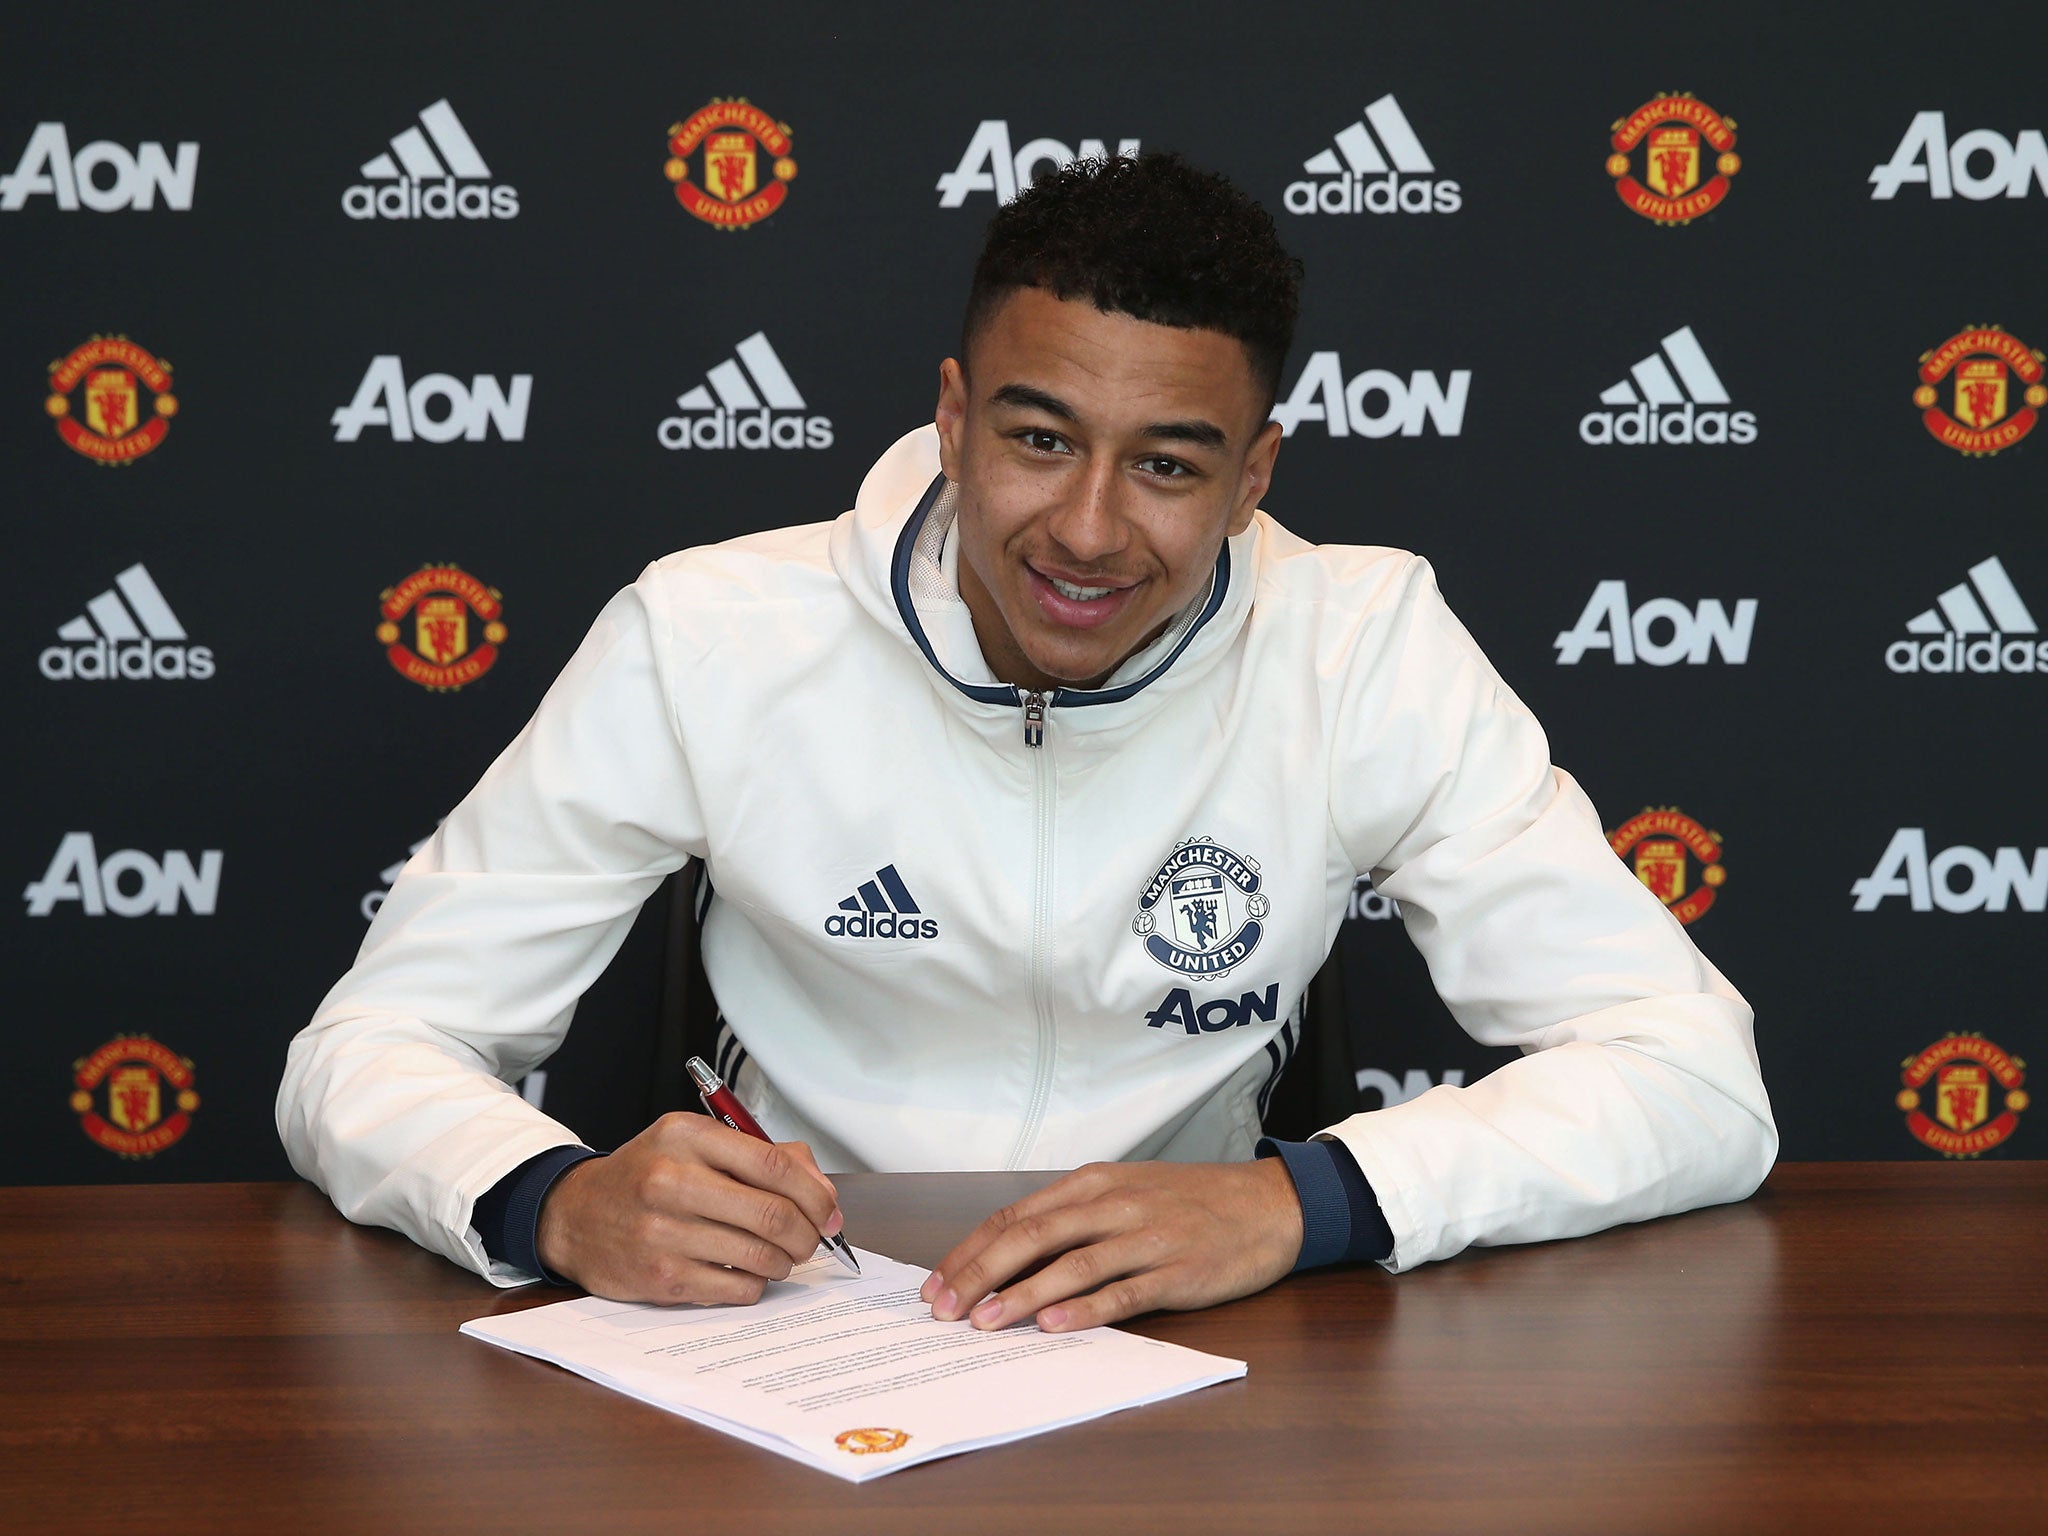 Lingard has put pen to paper on a new contract